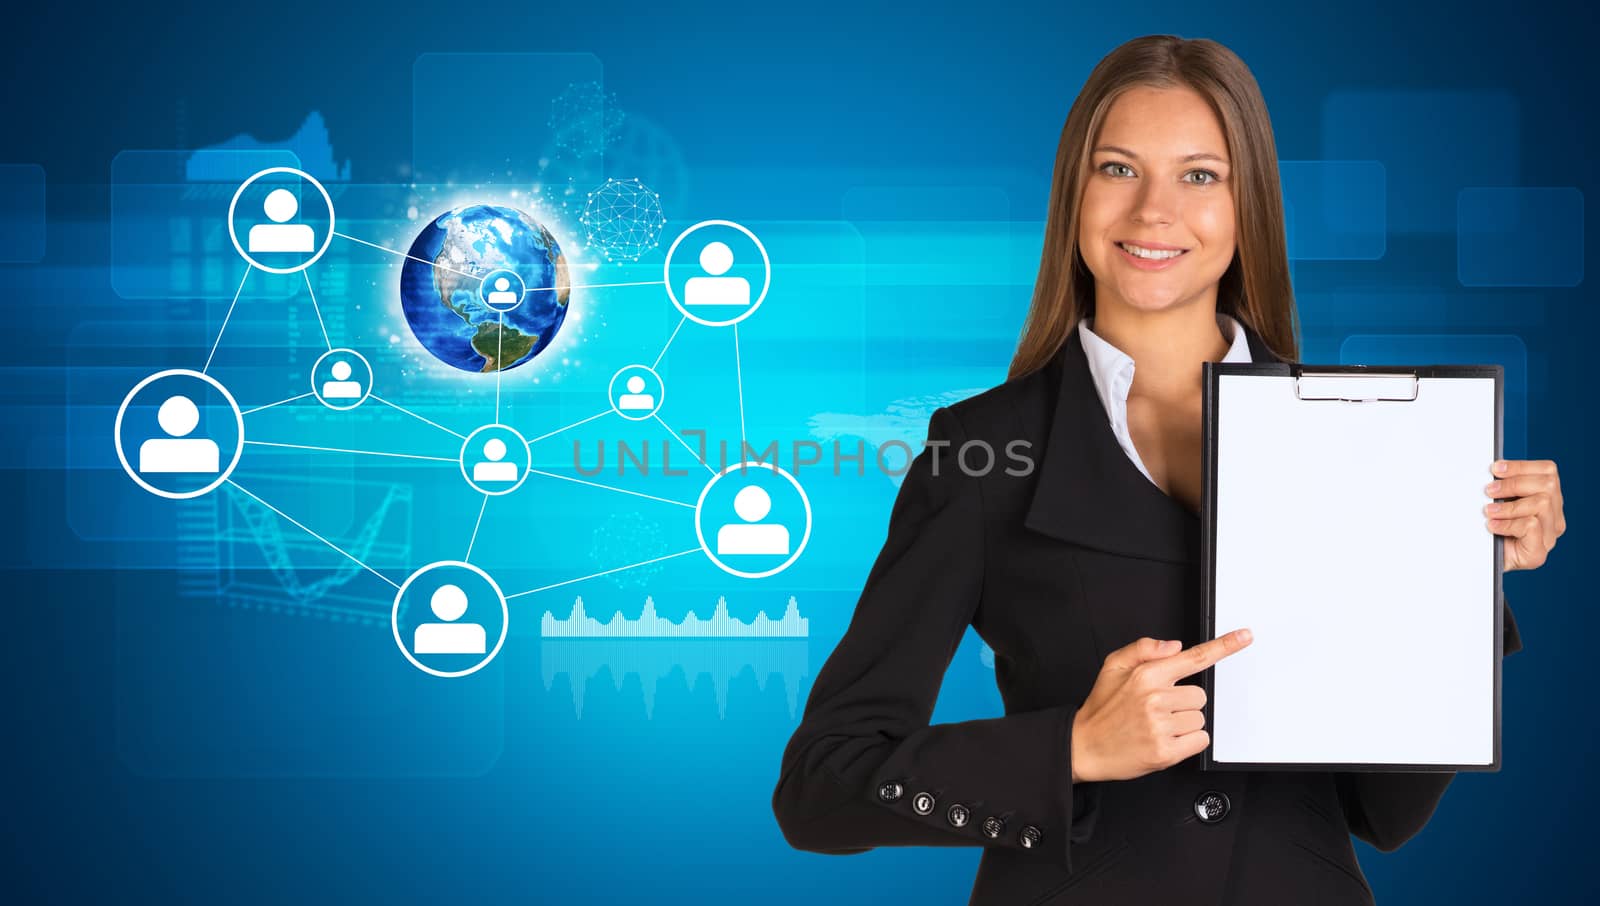 Beautiful businesswoman in suit holding paper holder by cherezoff